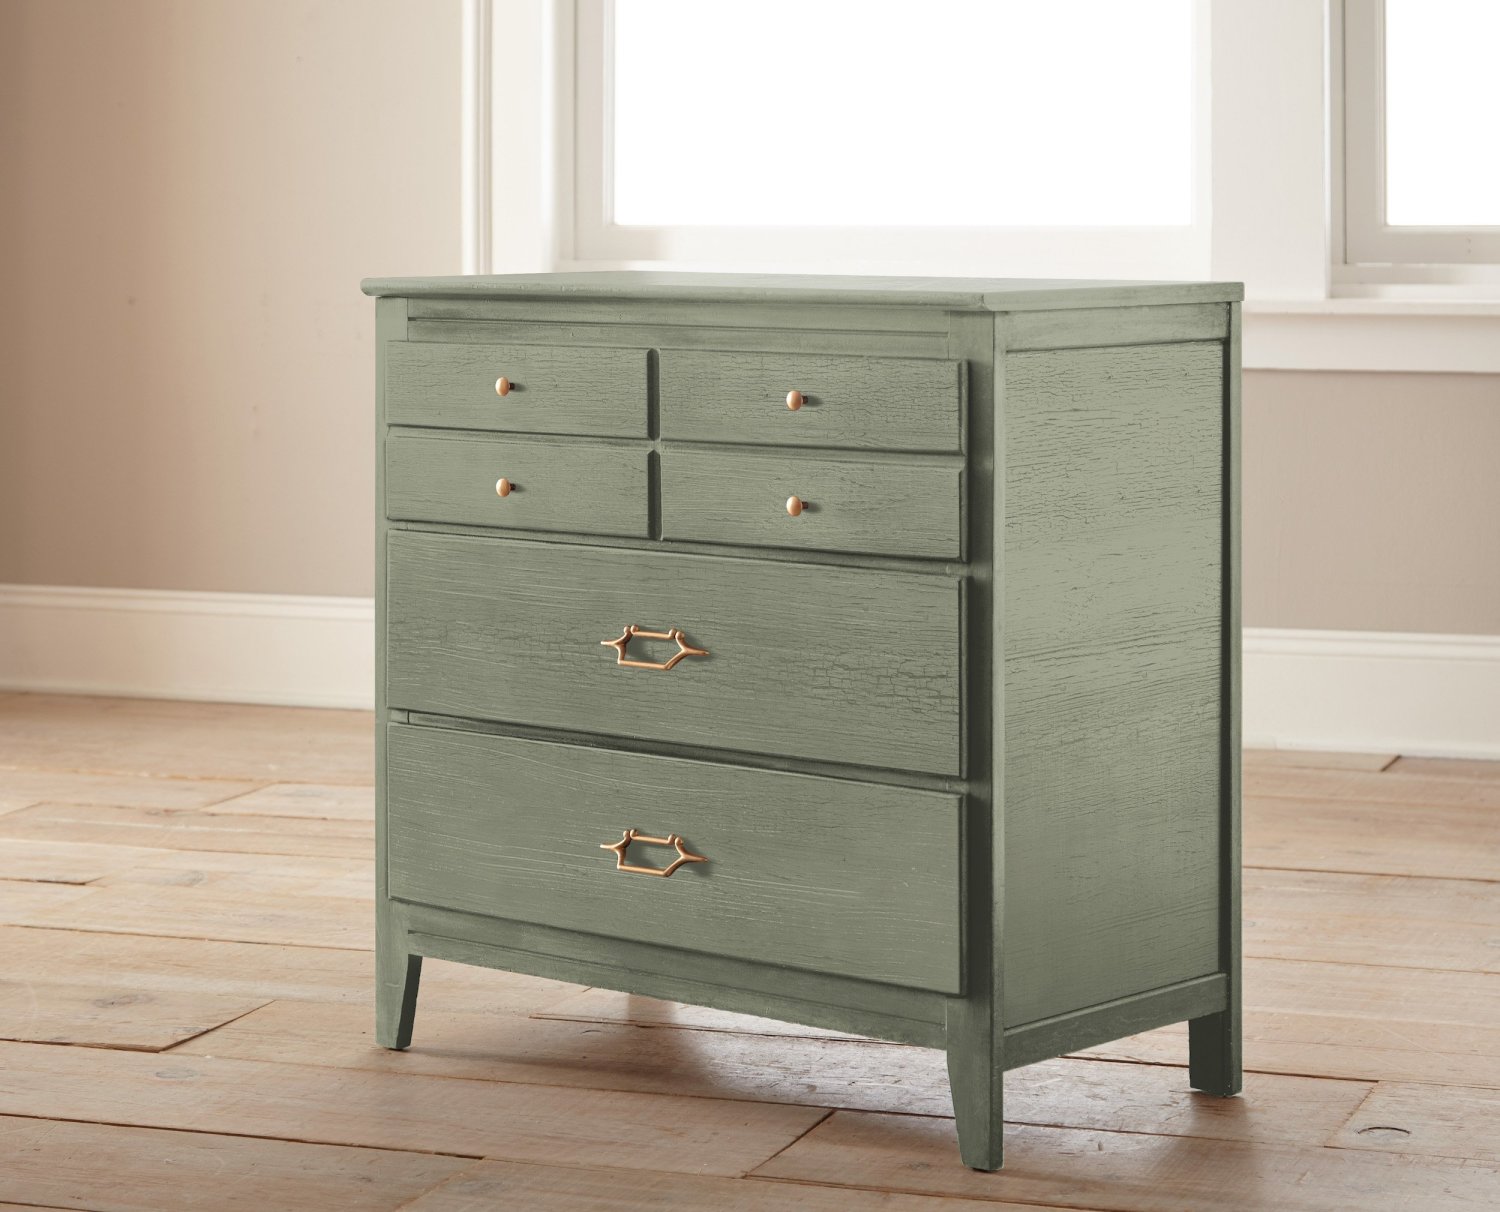 Magnolia Home Chalk Painted Bedside Table - In My Own Style